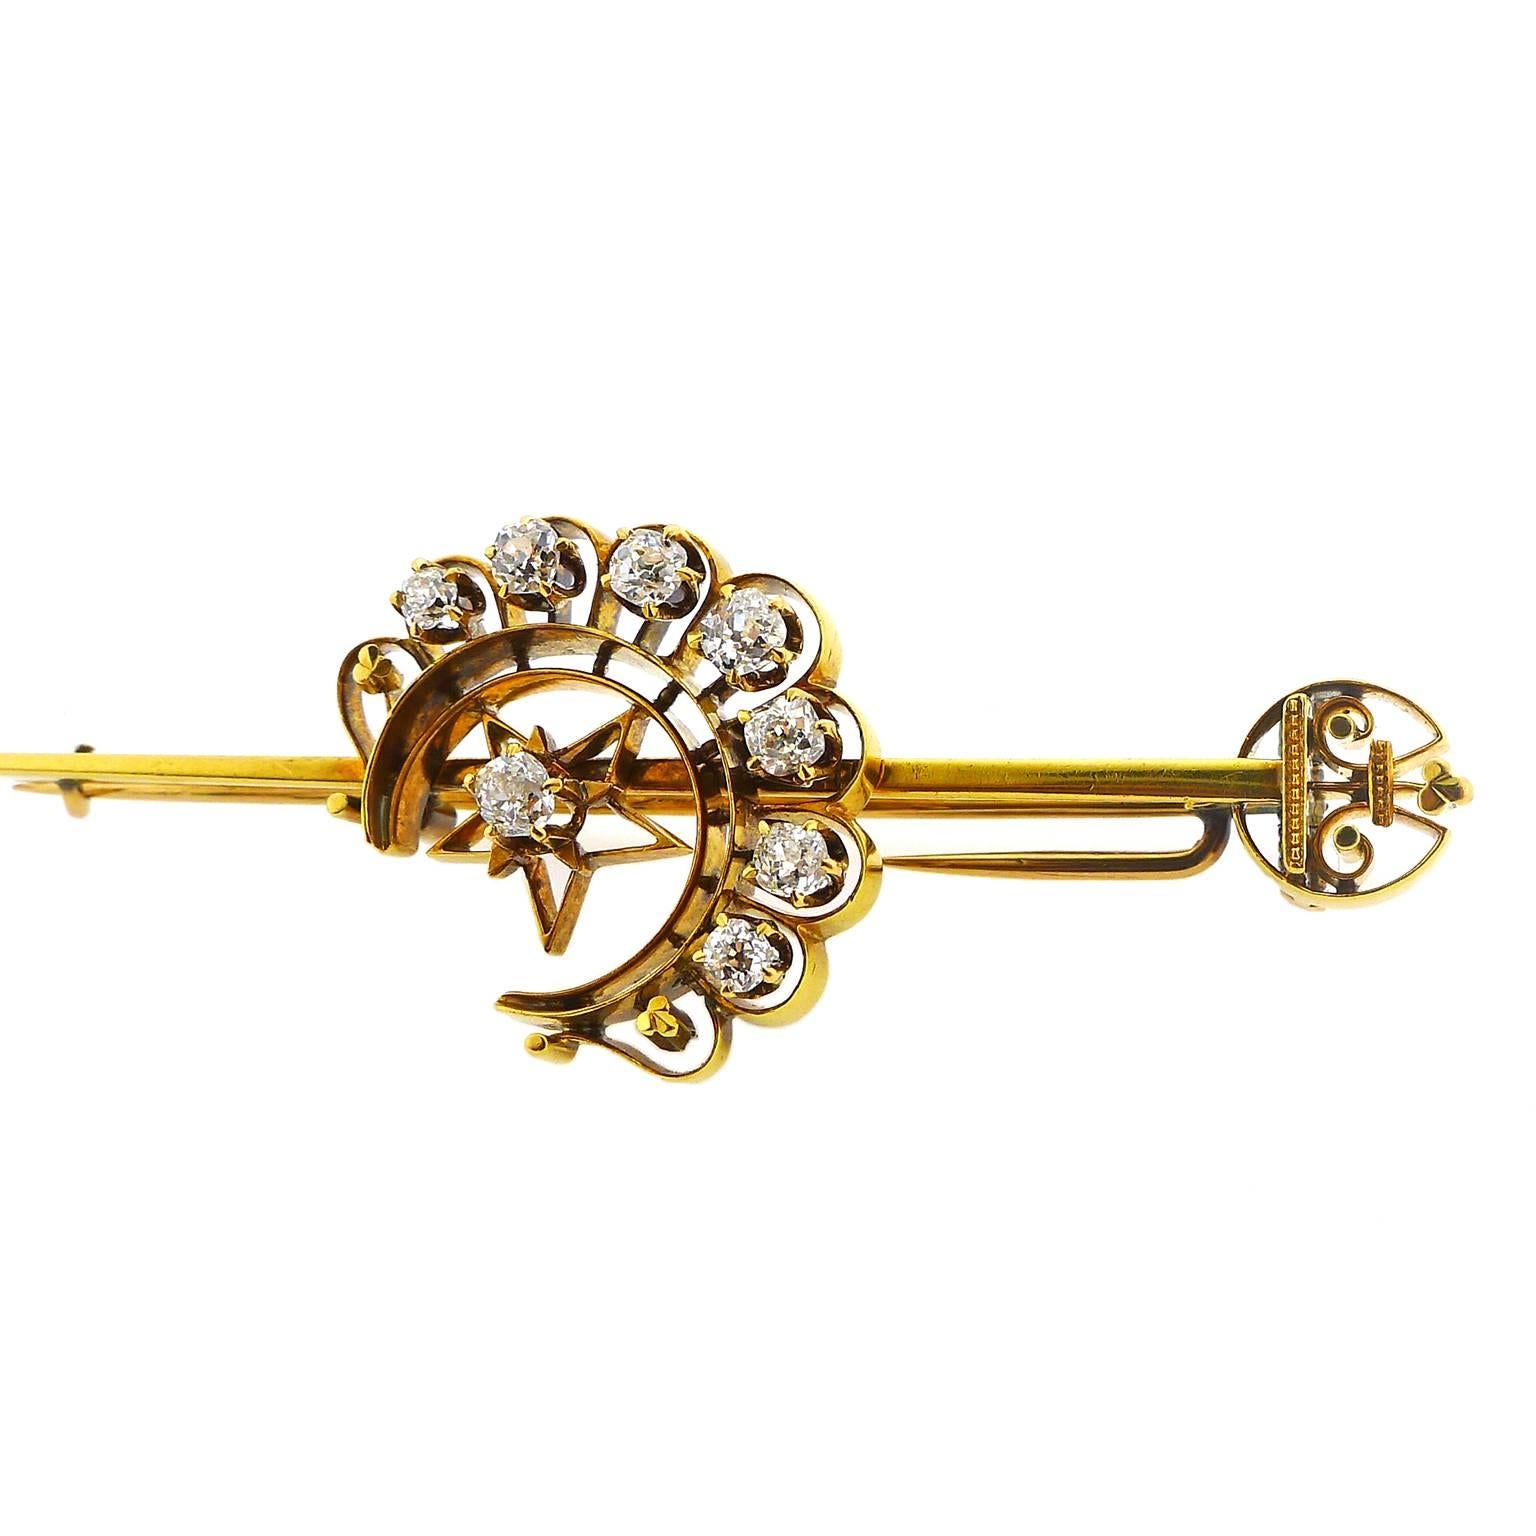 A 14 karat yellow gold diamond brooch set with 8 mine cut diamonds, graduating from 2.2 millimeters to 3.1 millimeters and totaling approximately 0.7 carats. Brooch is 2.5 inches long and 0.75 inches wide at its widest point.  Weight is 10.95 grams.